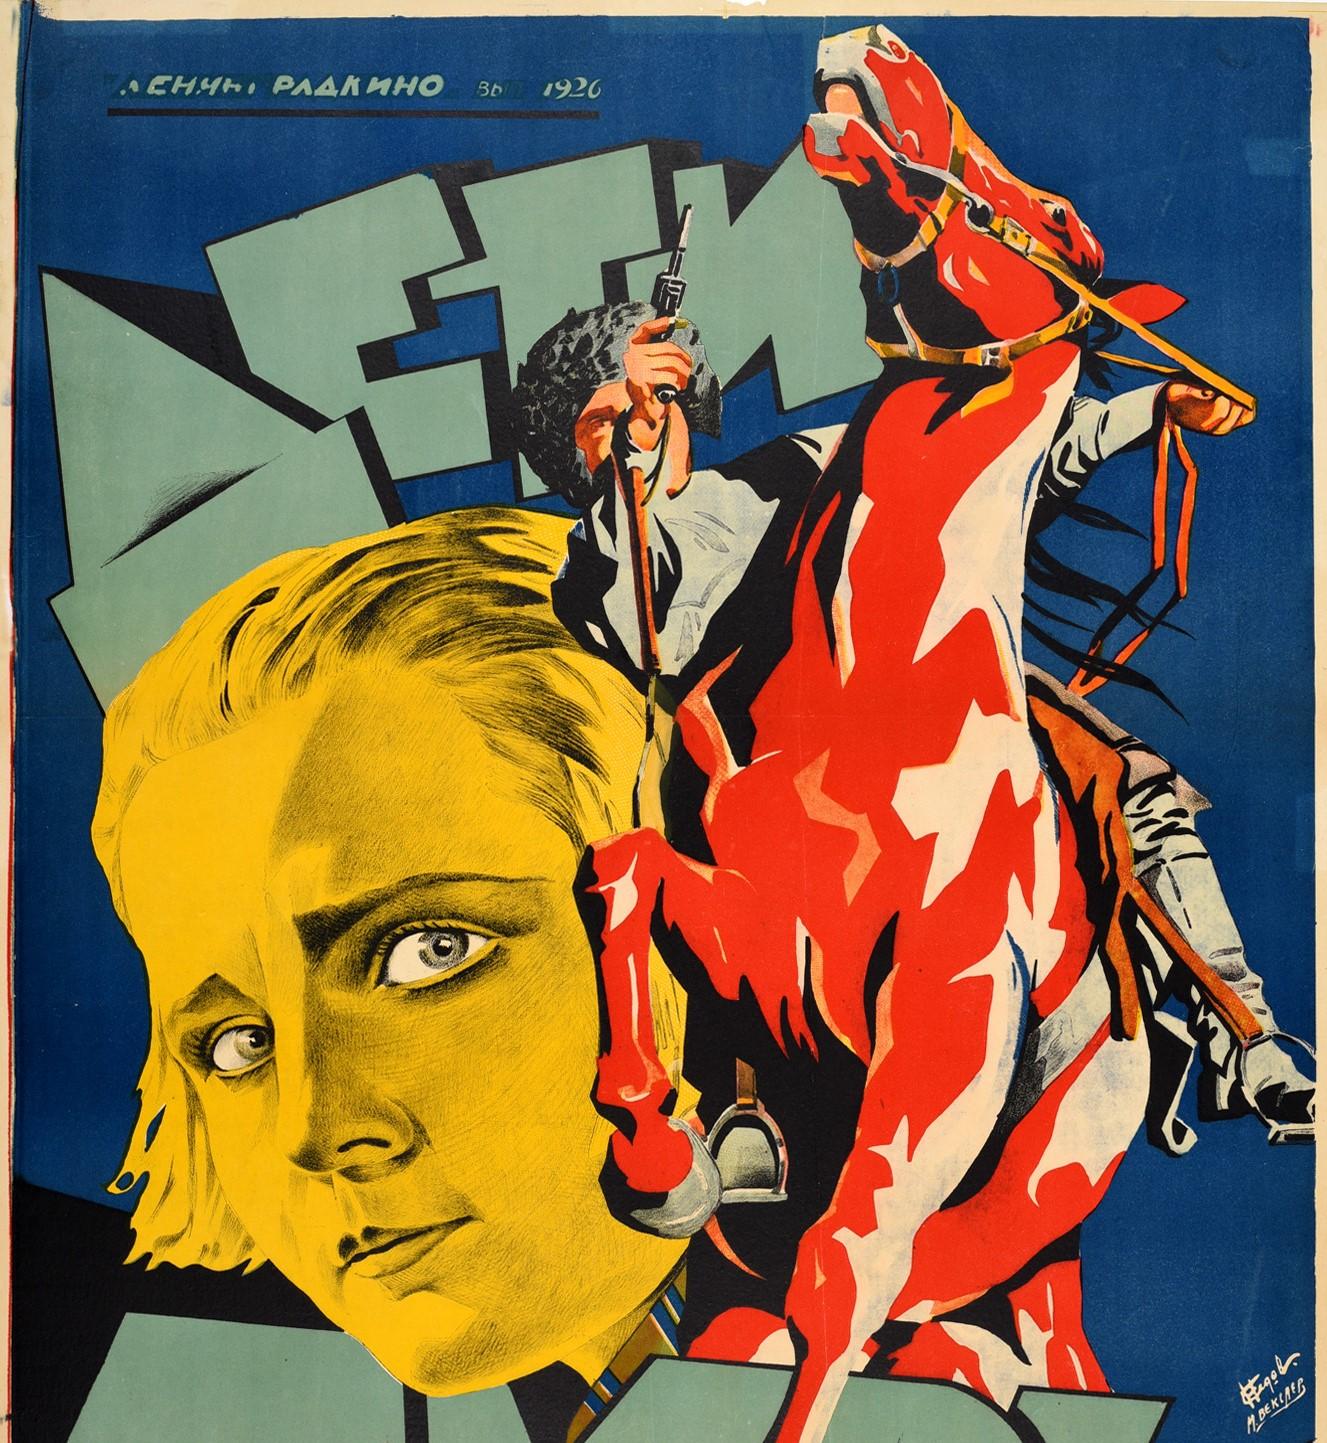 Original vintage Soviet film poster for Children of the Storm / Дети бури co-directed by Eduard Johanson and the award winning director, actor and screenwriter Friedrich Ermler (Fridrikh Markovich Ermler; 1898-1967) and starring Sergey Glagolin,